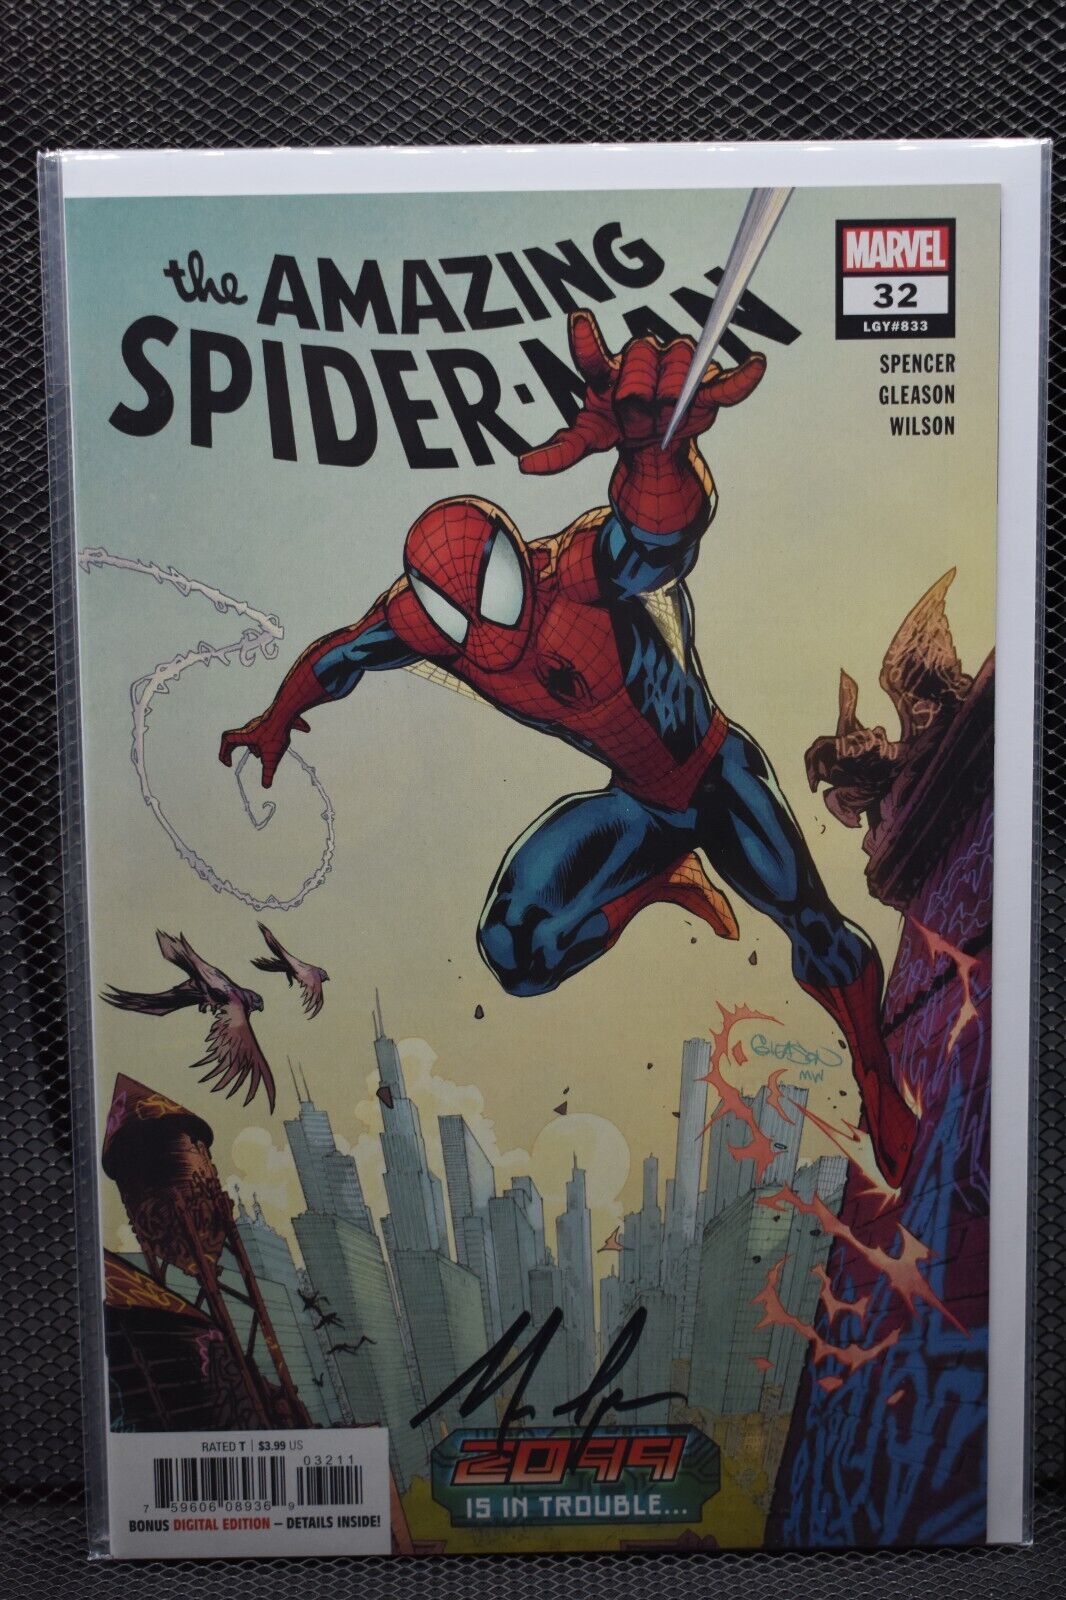 Amazing Spider-Man #32 LGY #833 Marvel 2019 2099 Signed by Nick Spencer 9.4